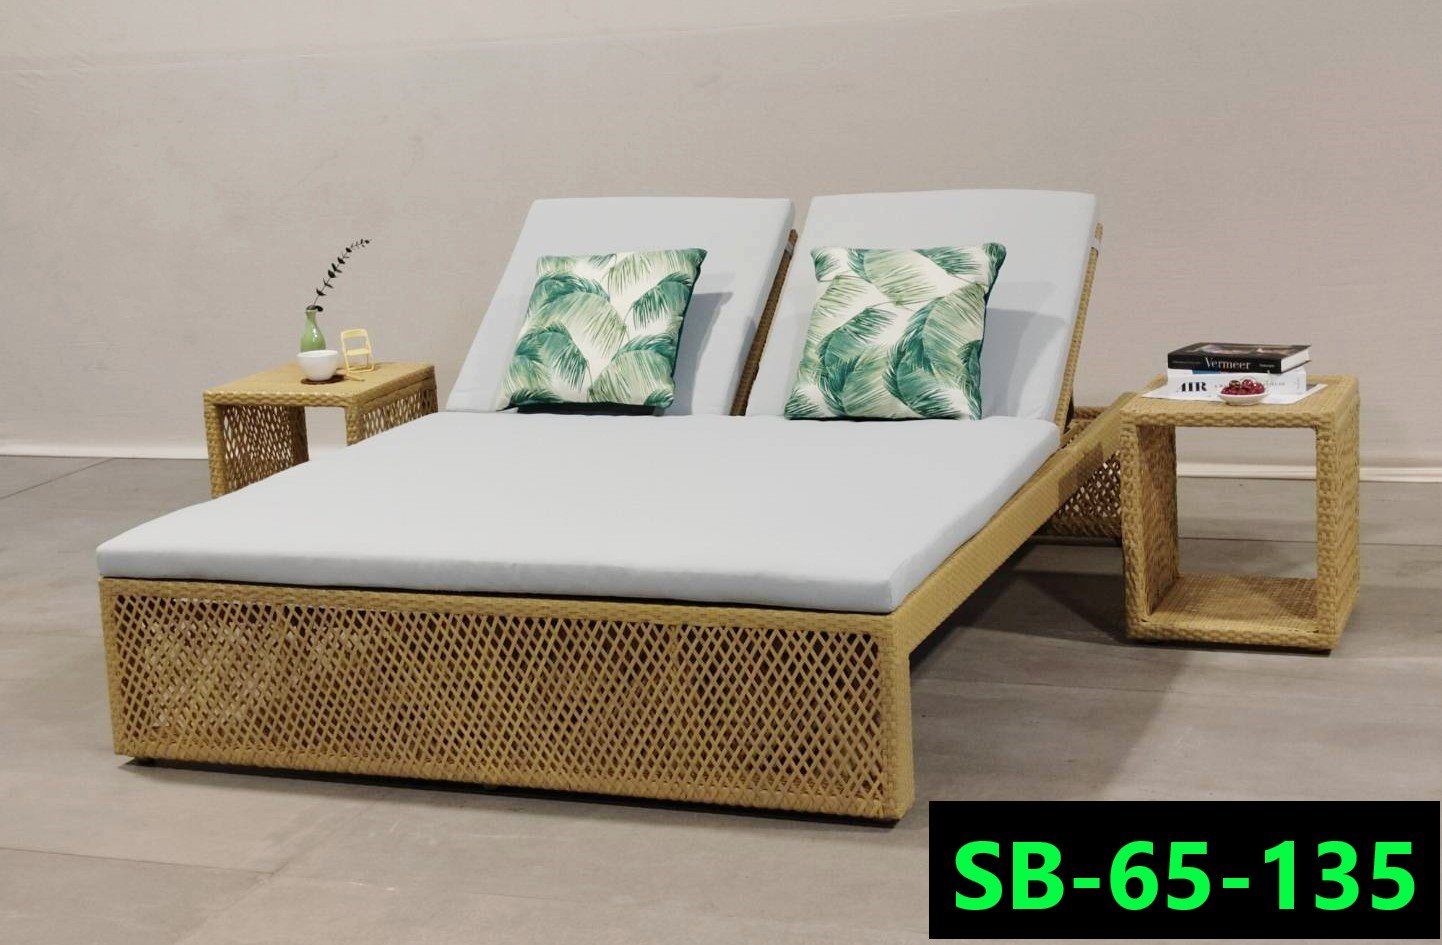 Rattan Sun Lounger/Bed Product code SB-65-135